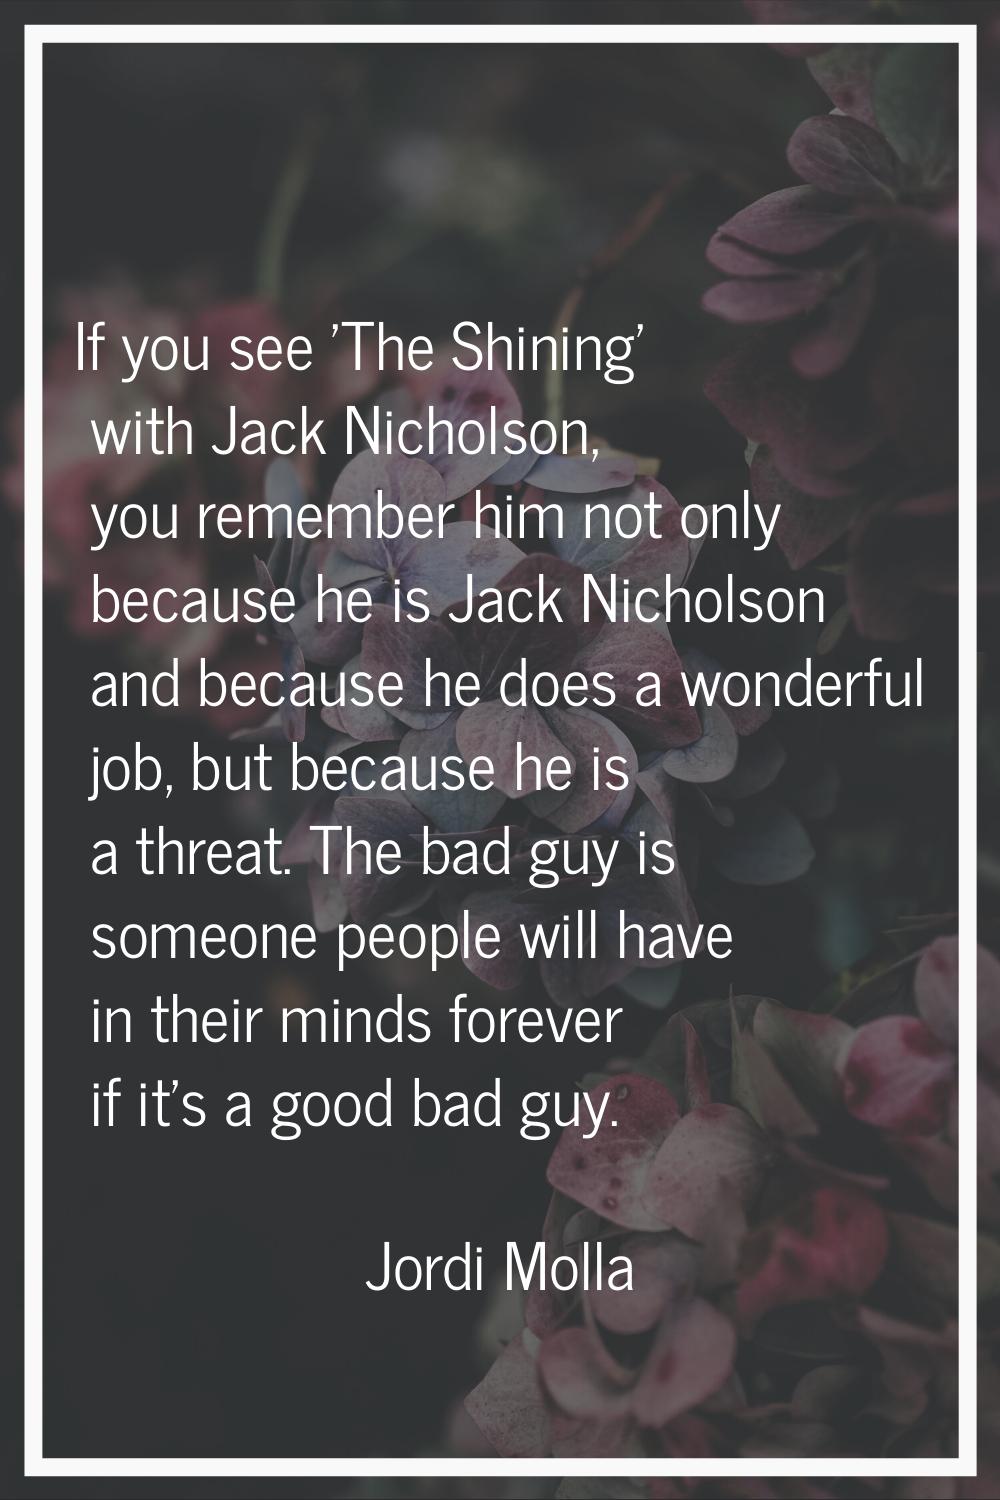 If you see 'The Shining' with Jack Nicholson, you remember him not only because he is Jack Nicholso